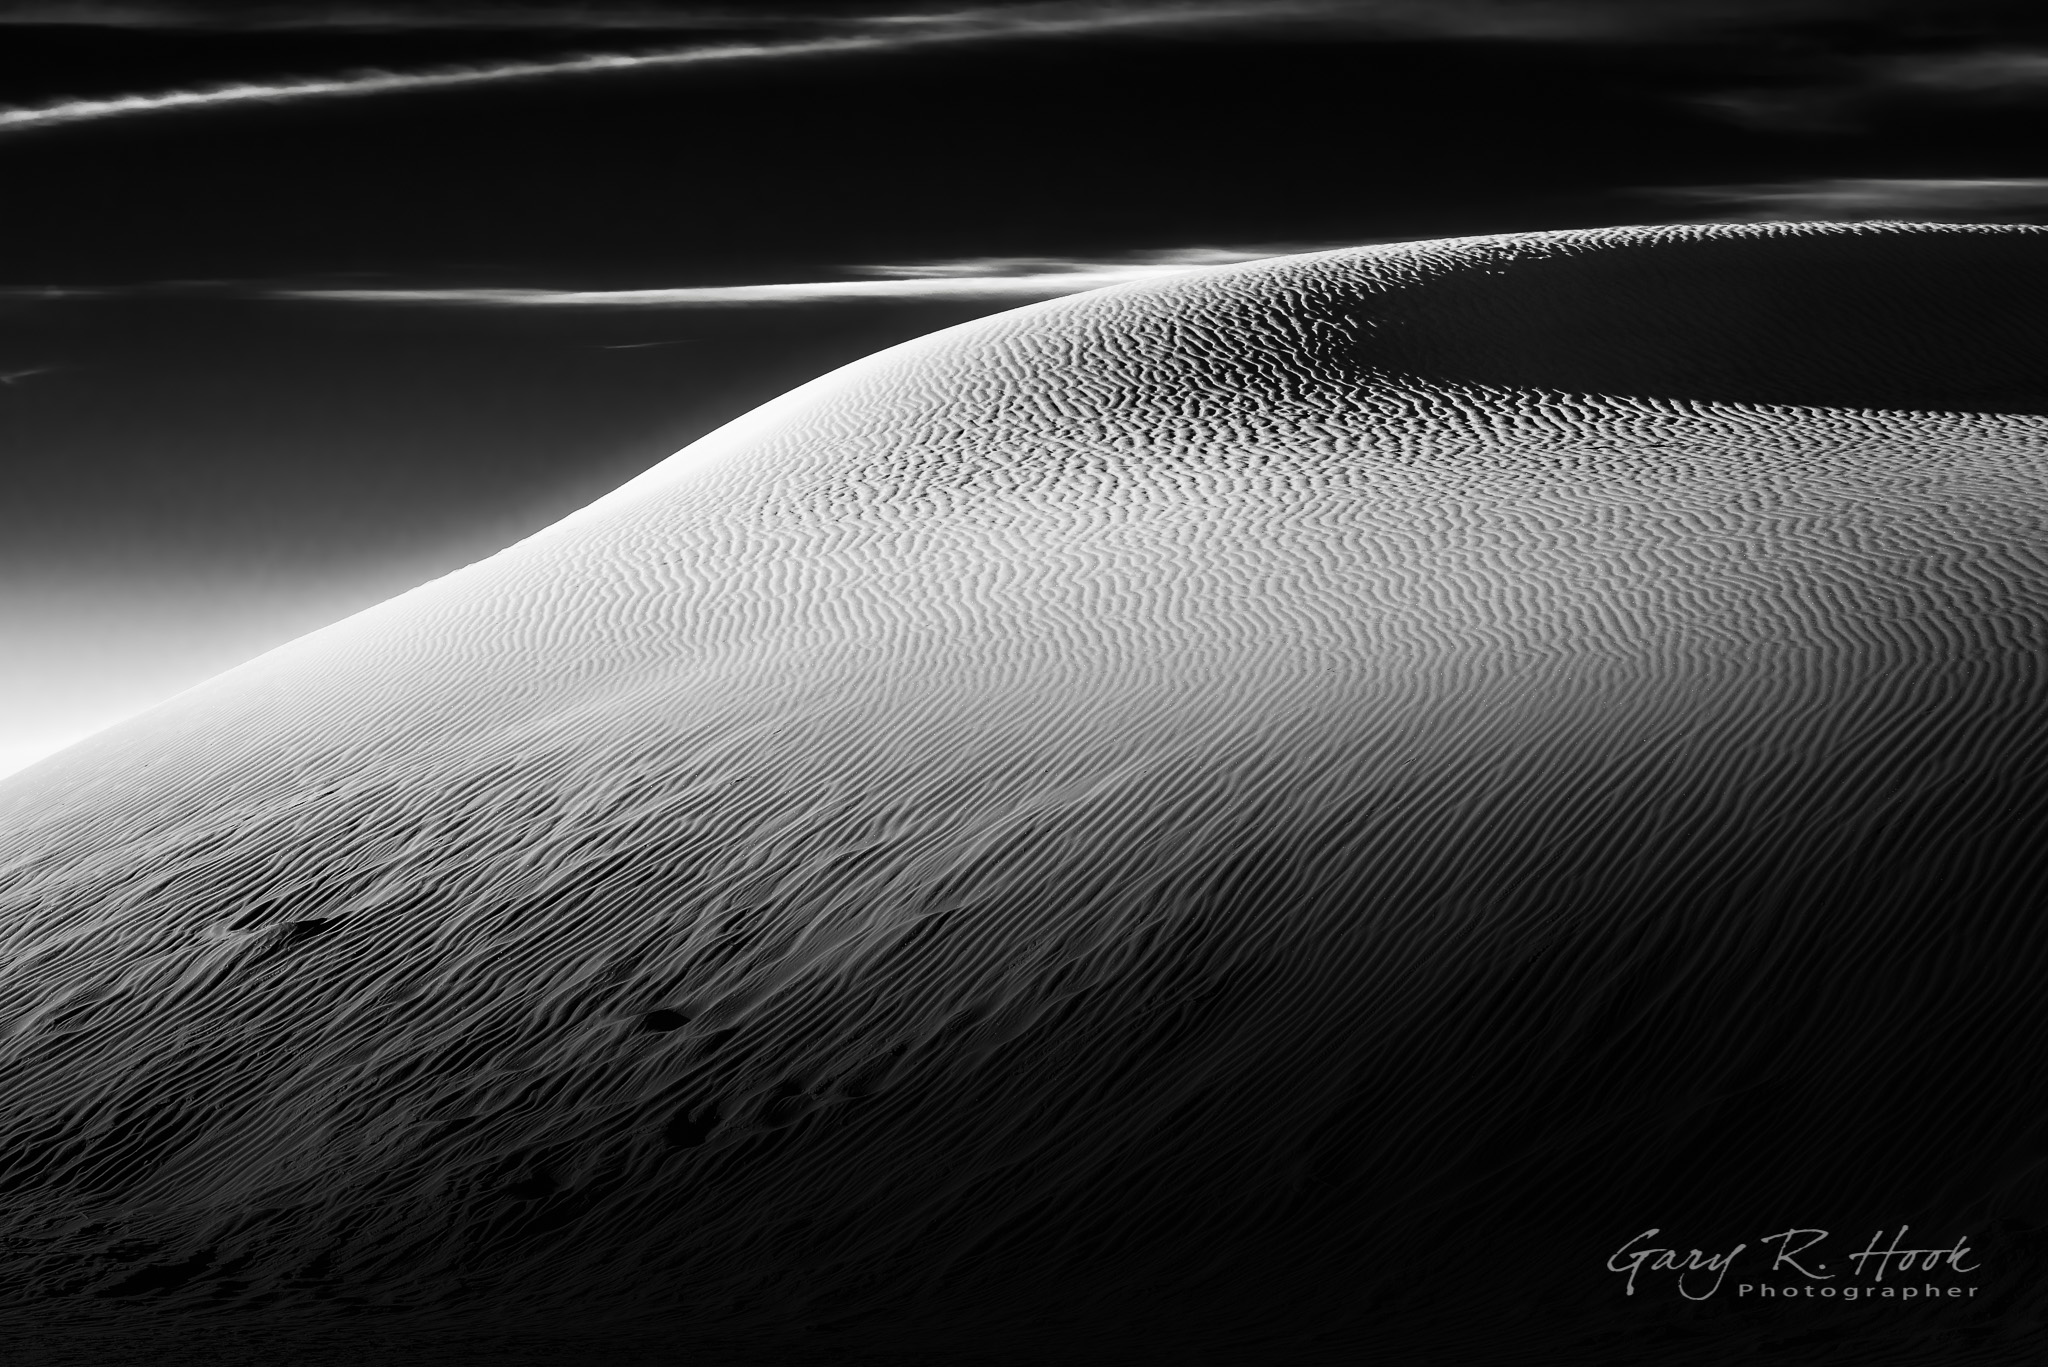 A Study of the Dunes